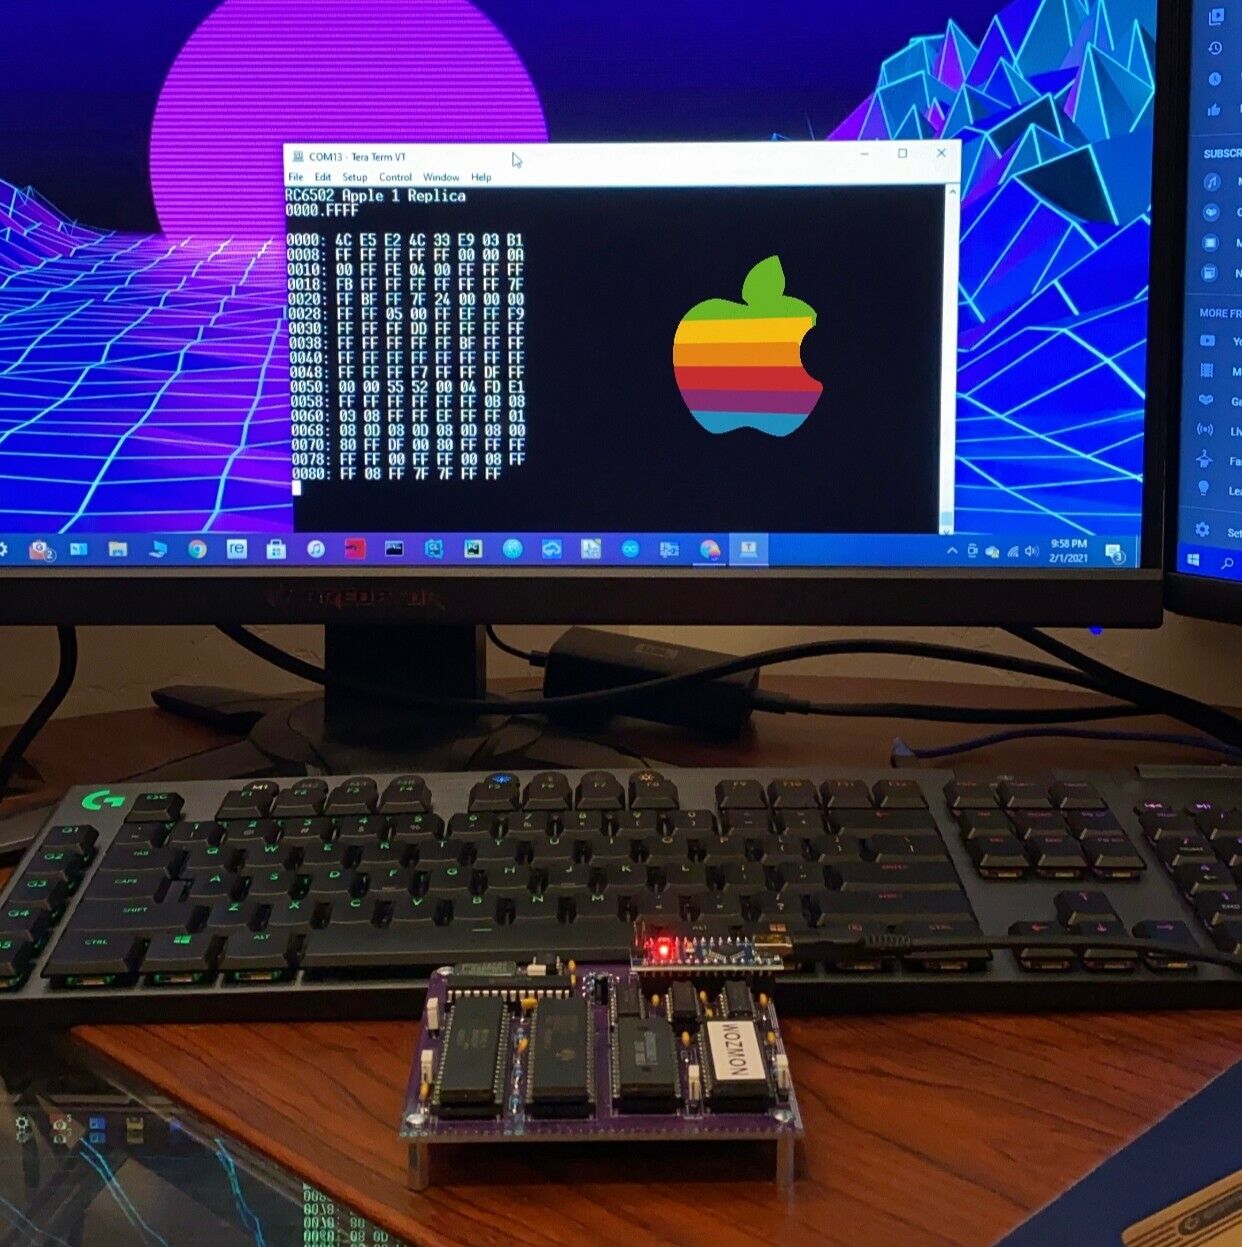 APPLE 1 8 BIT 6502 HOMEBREW COMPUTER BUILD KIT - ALL IC COMPONENTS INCLUDED